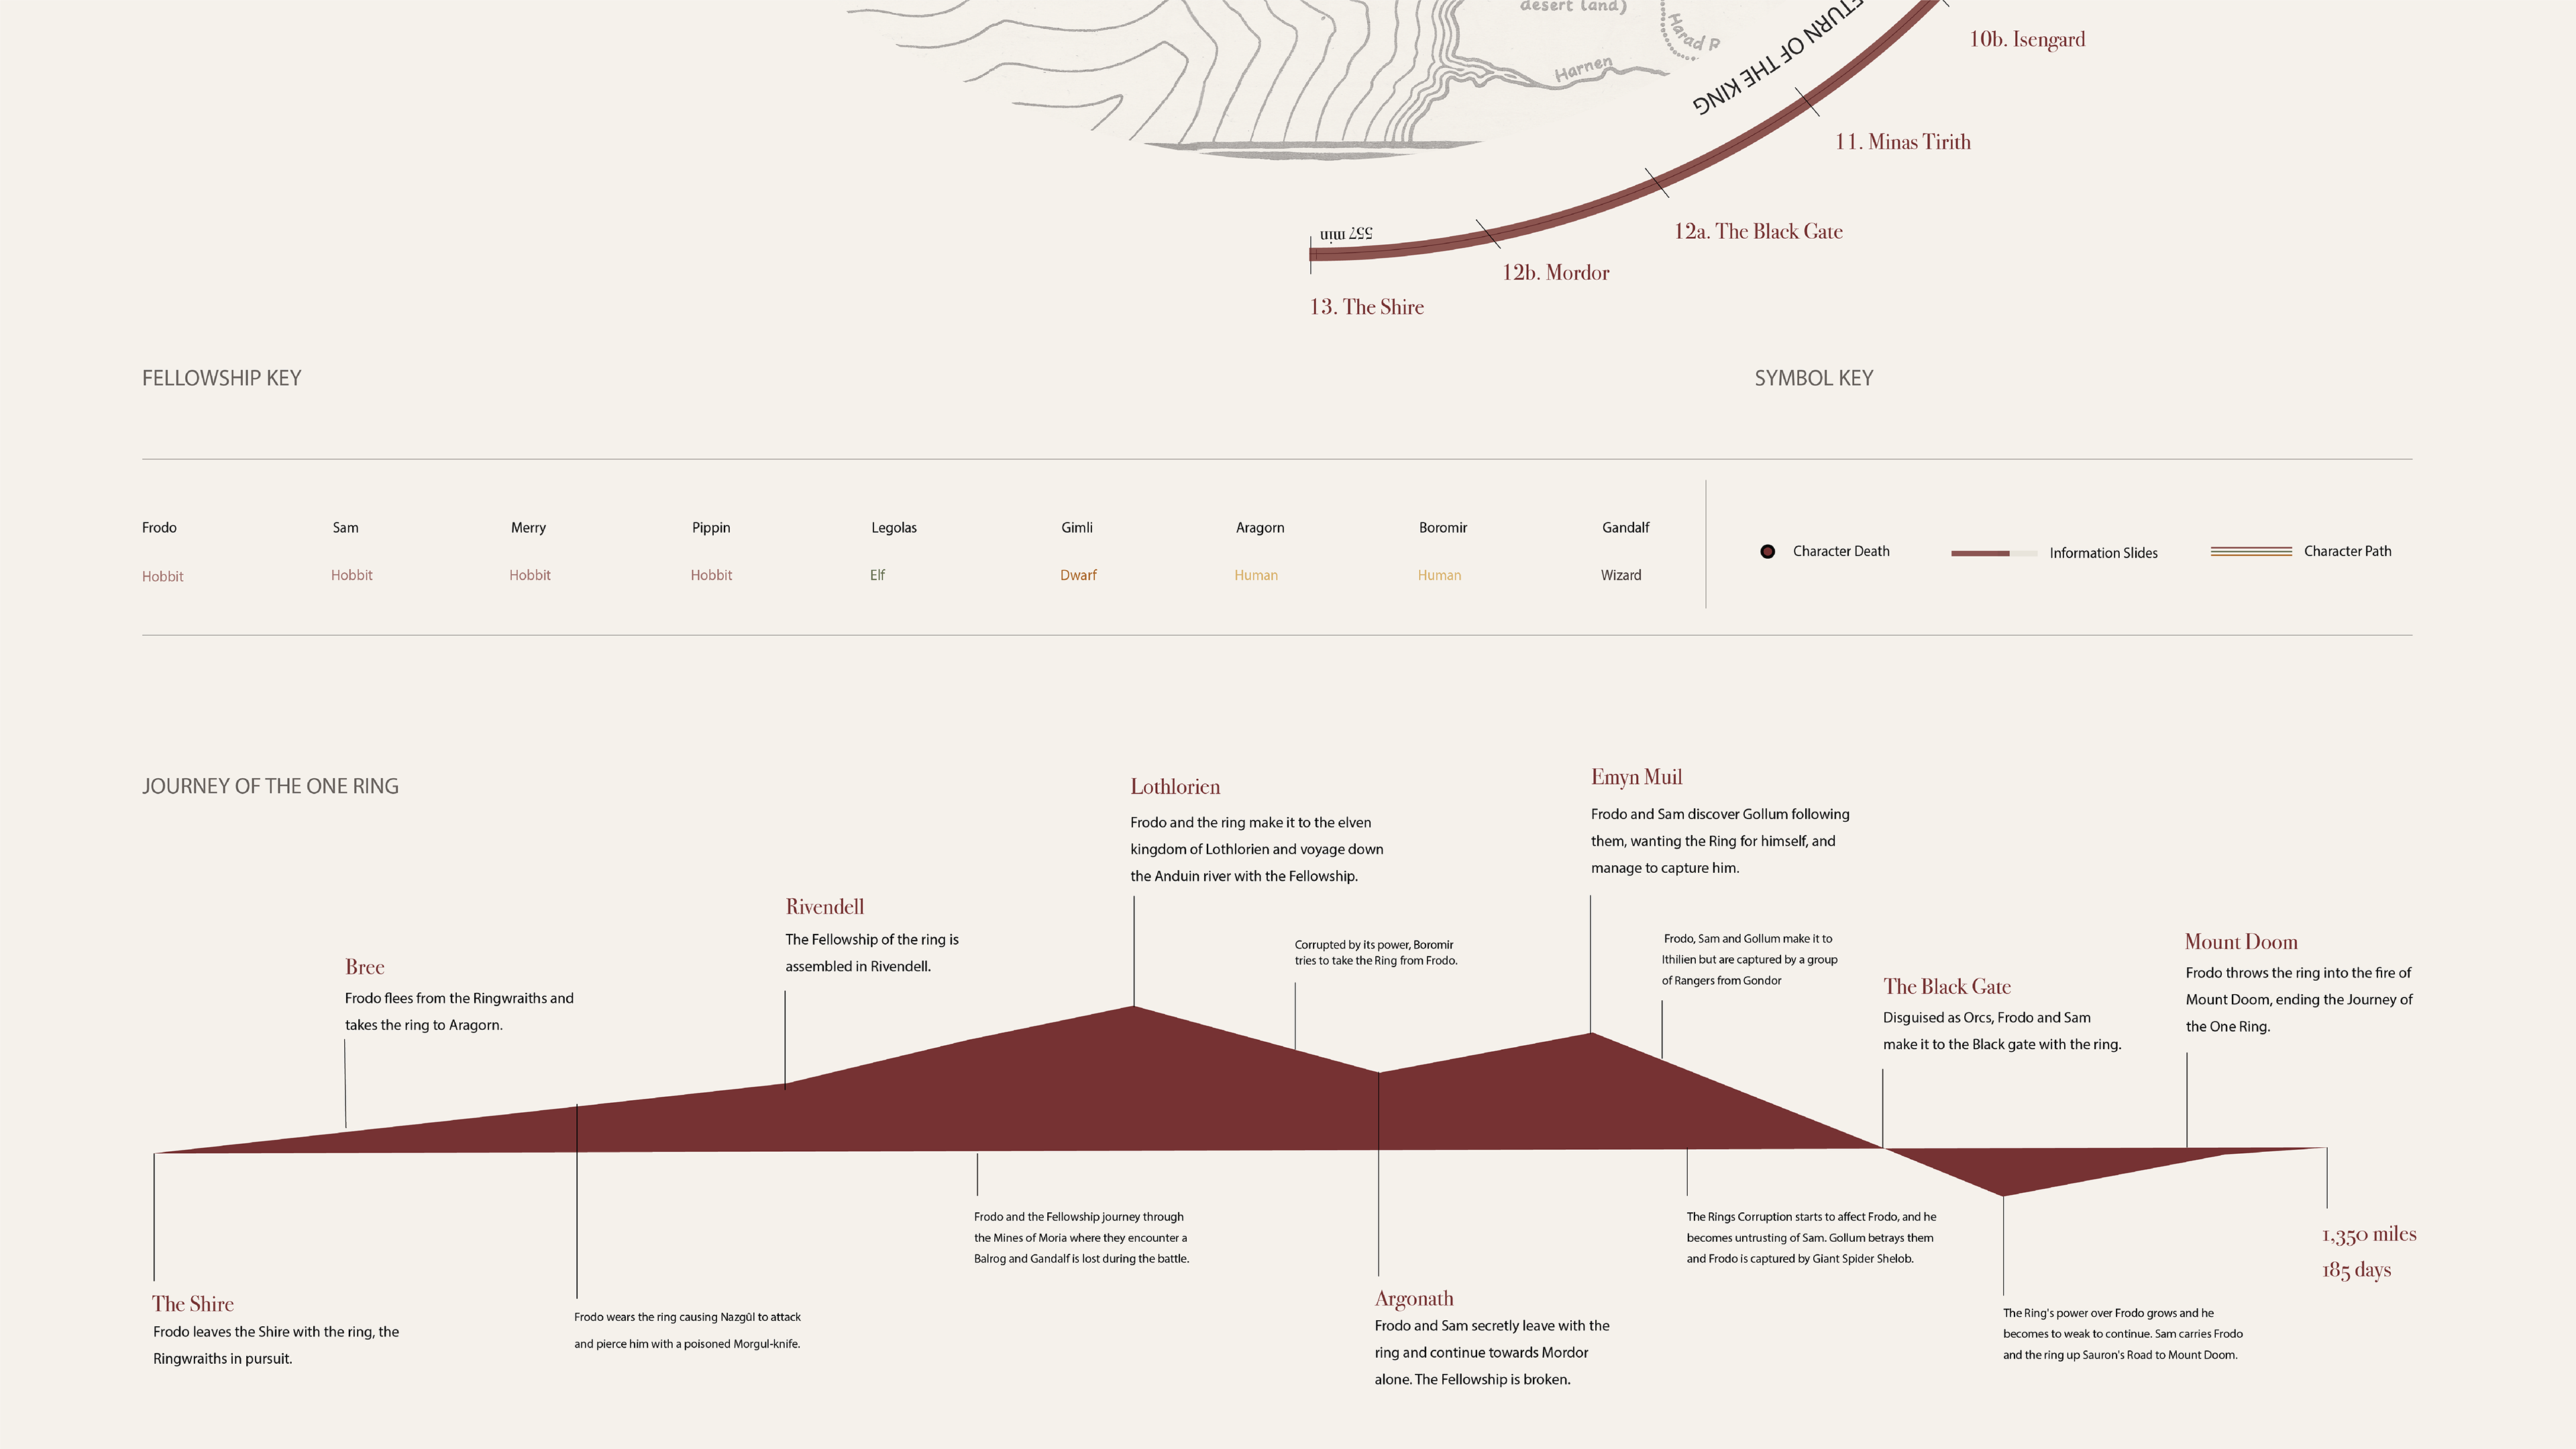 The Fellowship of the Ring timeline